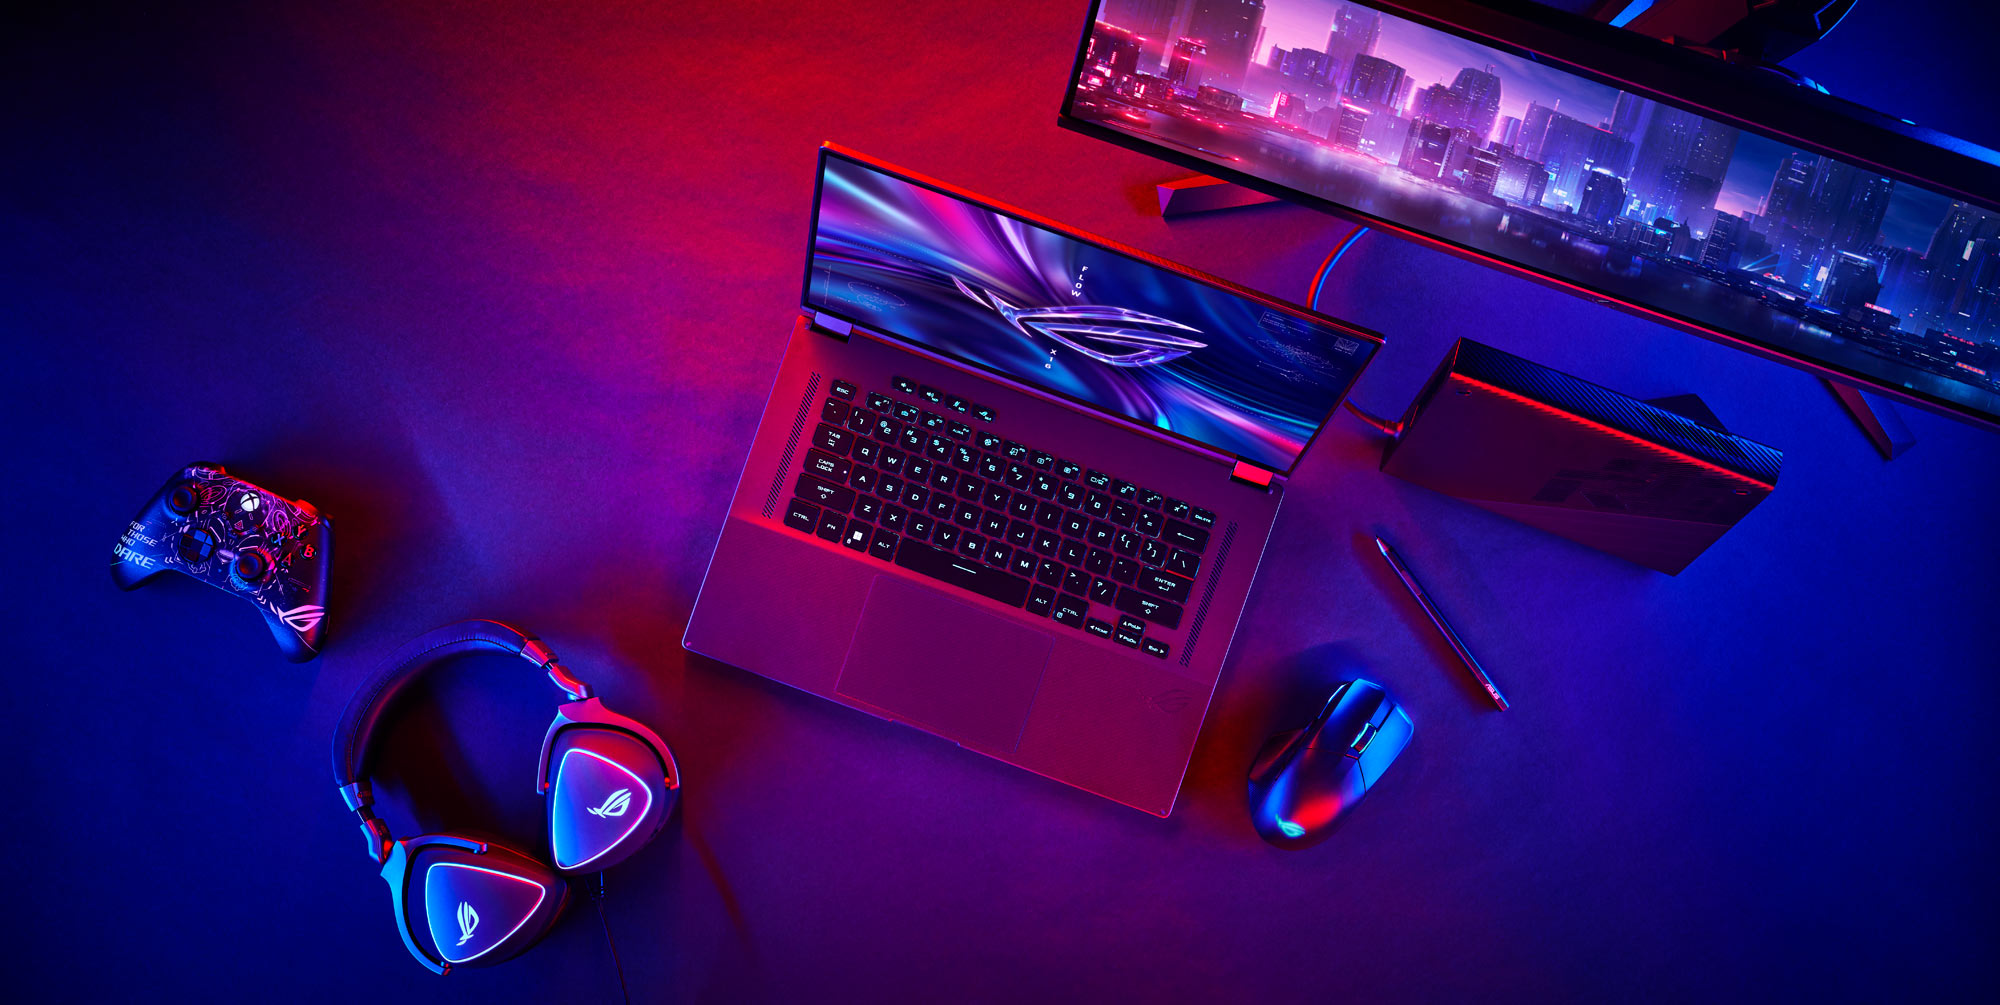 A birds-eye view of the ROG Flow X16 laptop, next to a mouse, controller, headset, and monitor.